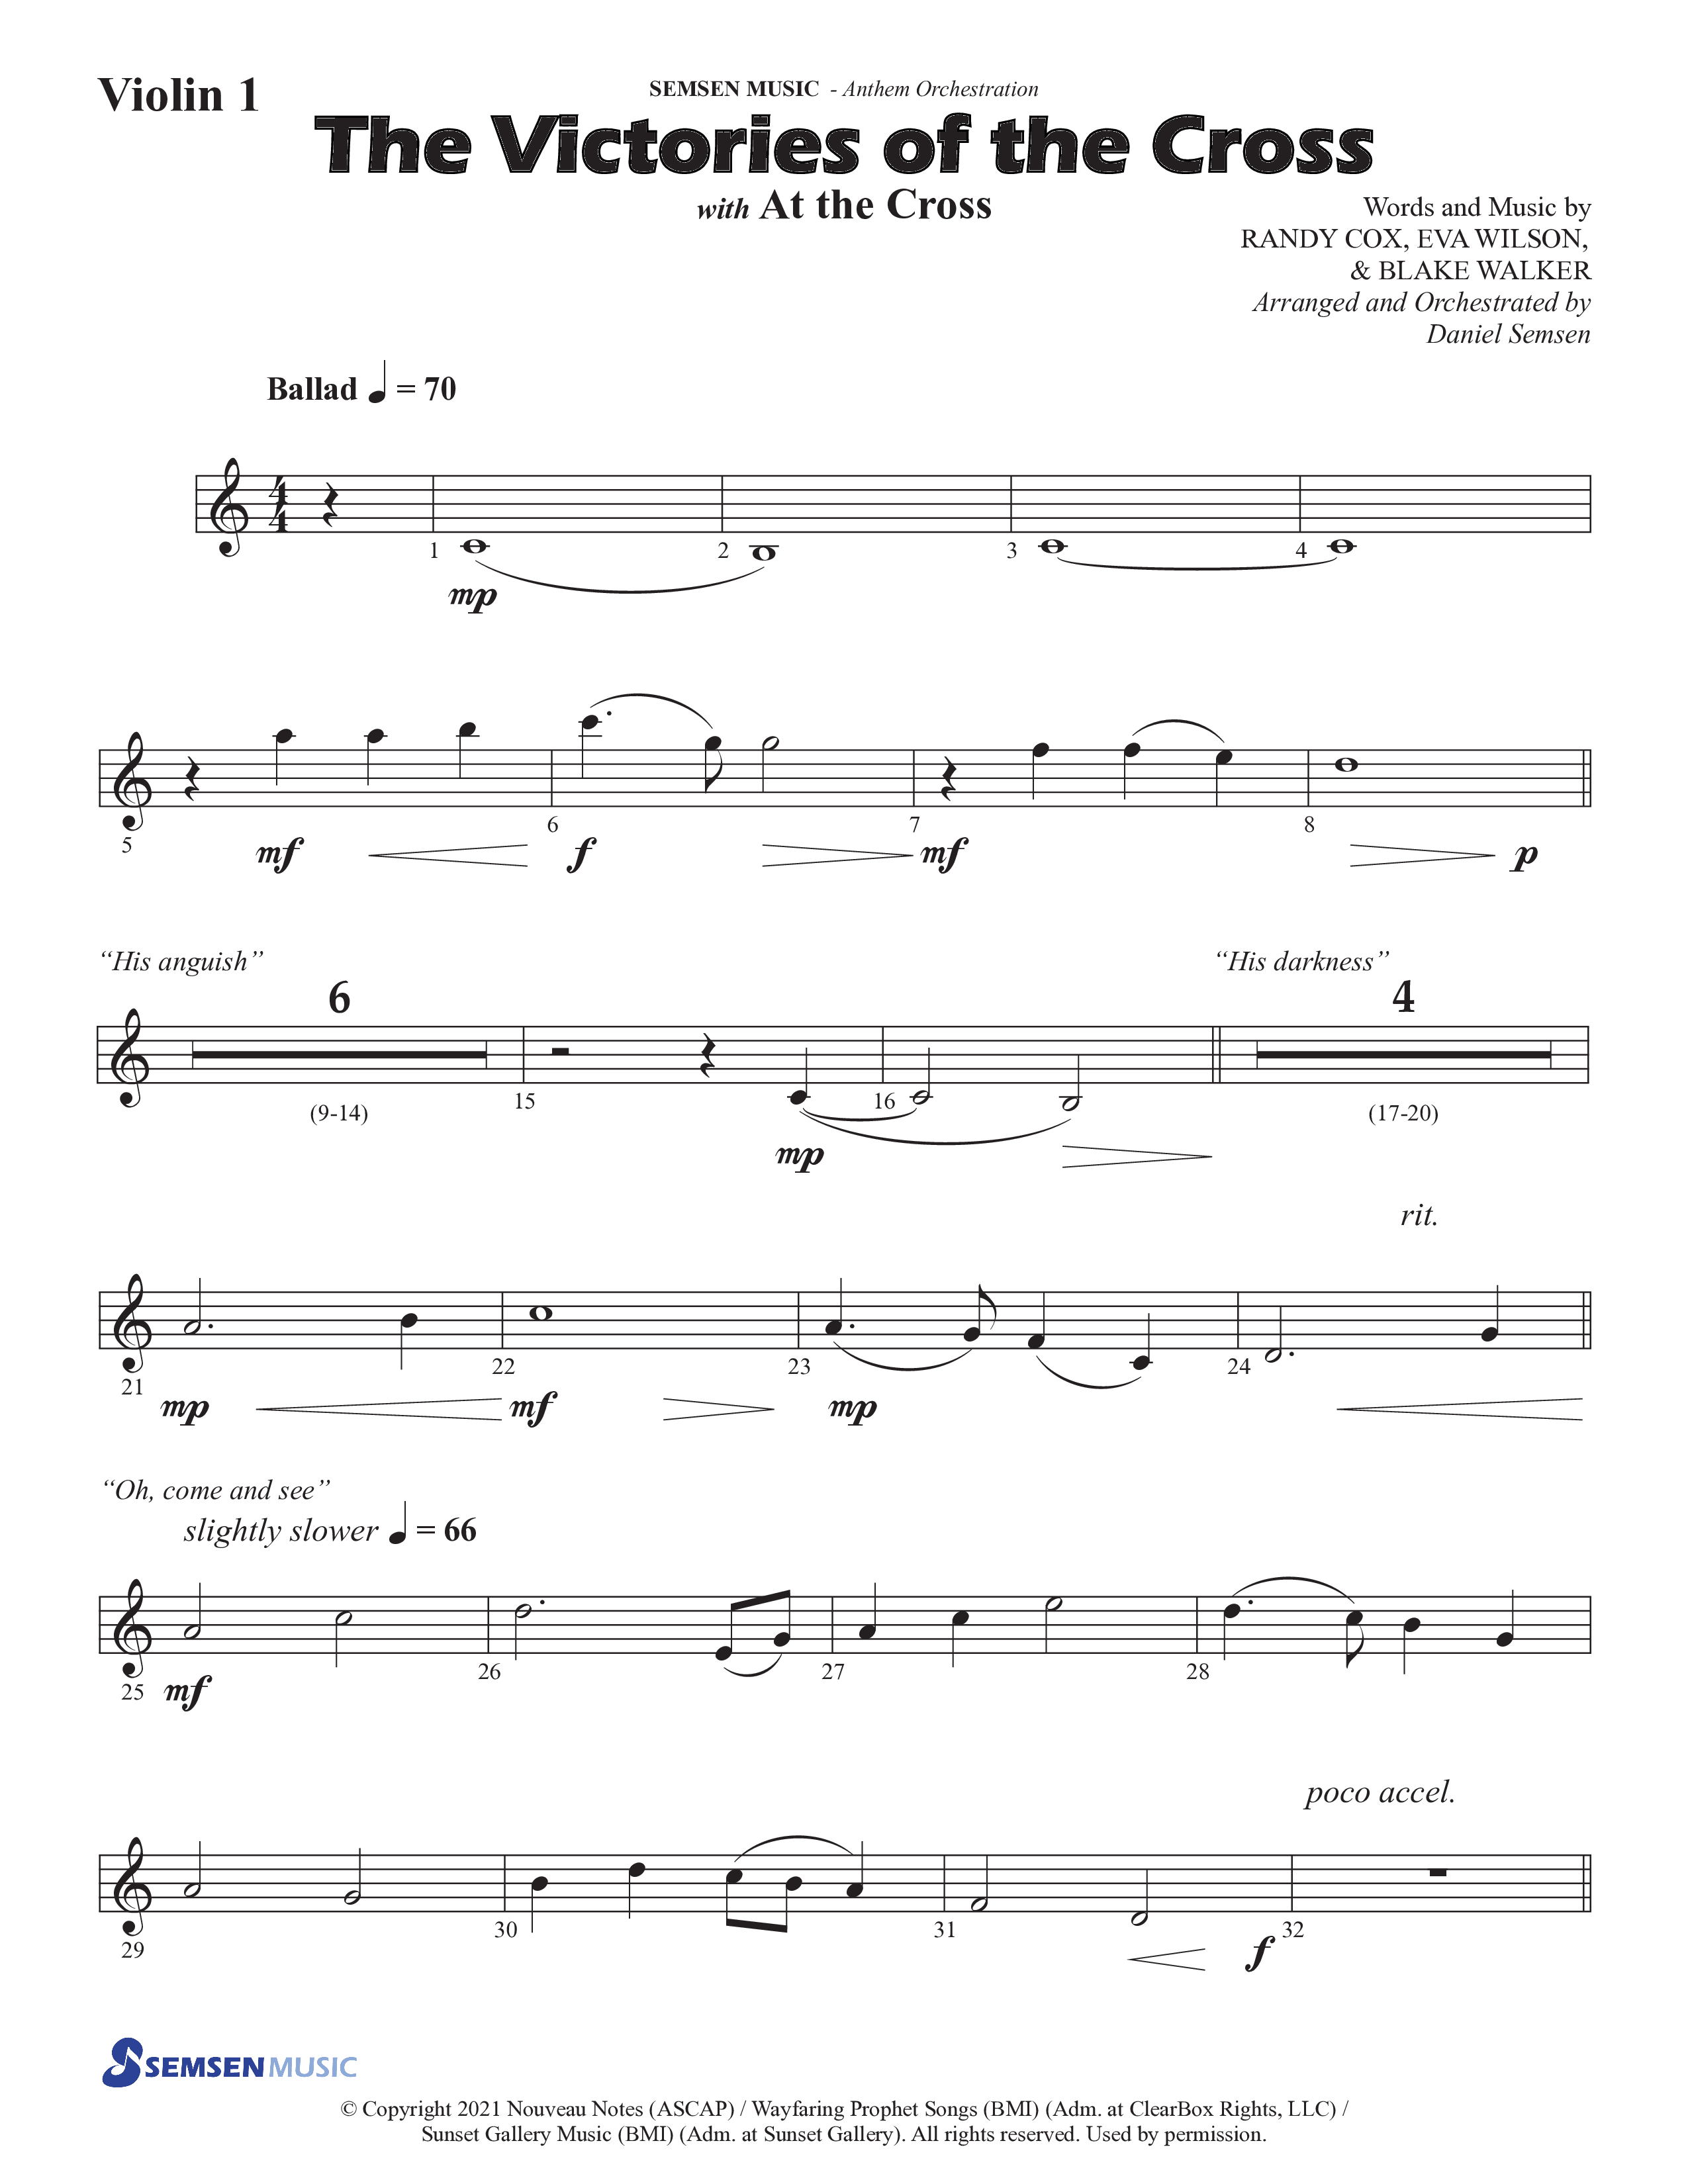 The Victories Of The Cross (with At The Cross) (Choral Anthem SATB) Violin 1 (Semsen Music / Arr. Daniel Semsen)